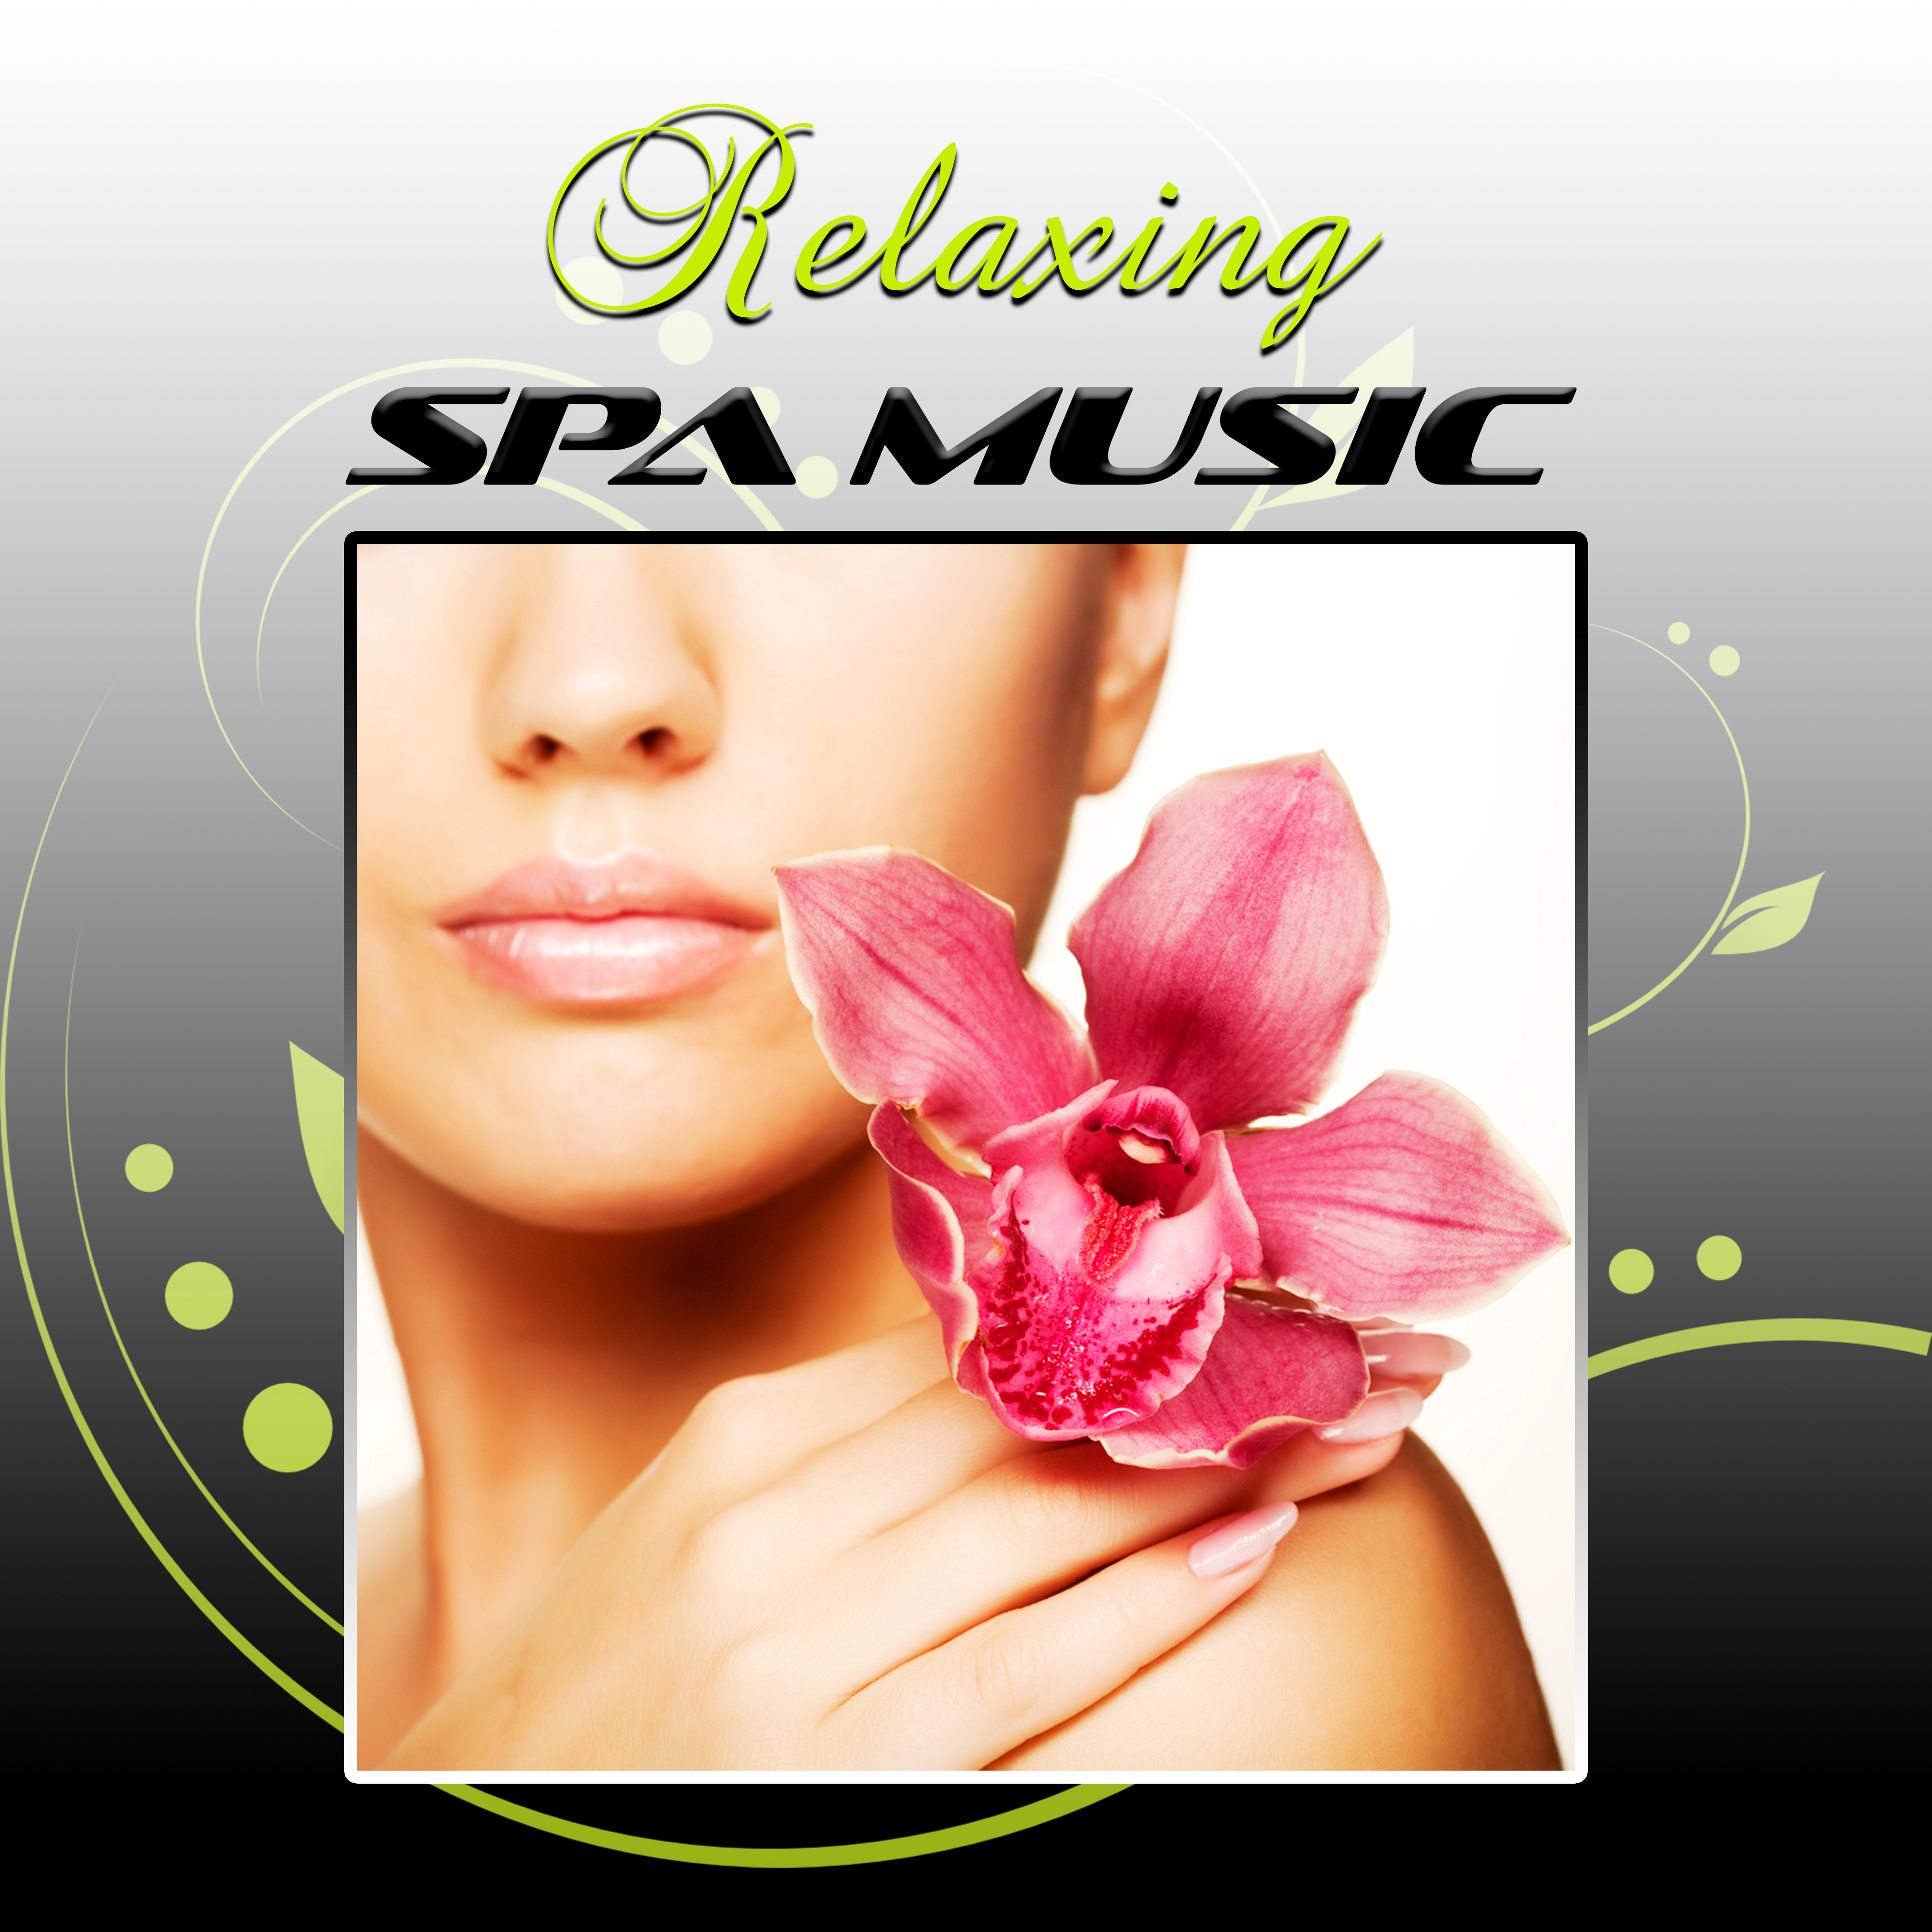 Relaxing Spa Music - Mood Wellness Center Songs, Relaxing Health Zen Spa Music, Tranquil Background Music for Spa, Well Being and Healthy Lifestyle